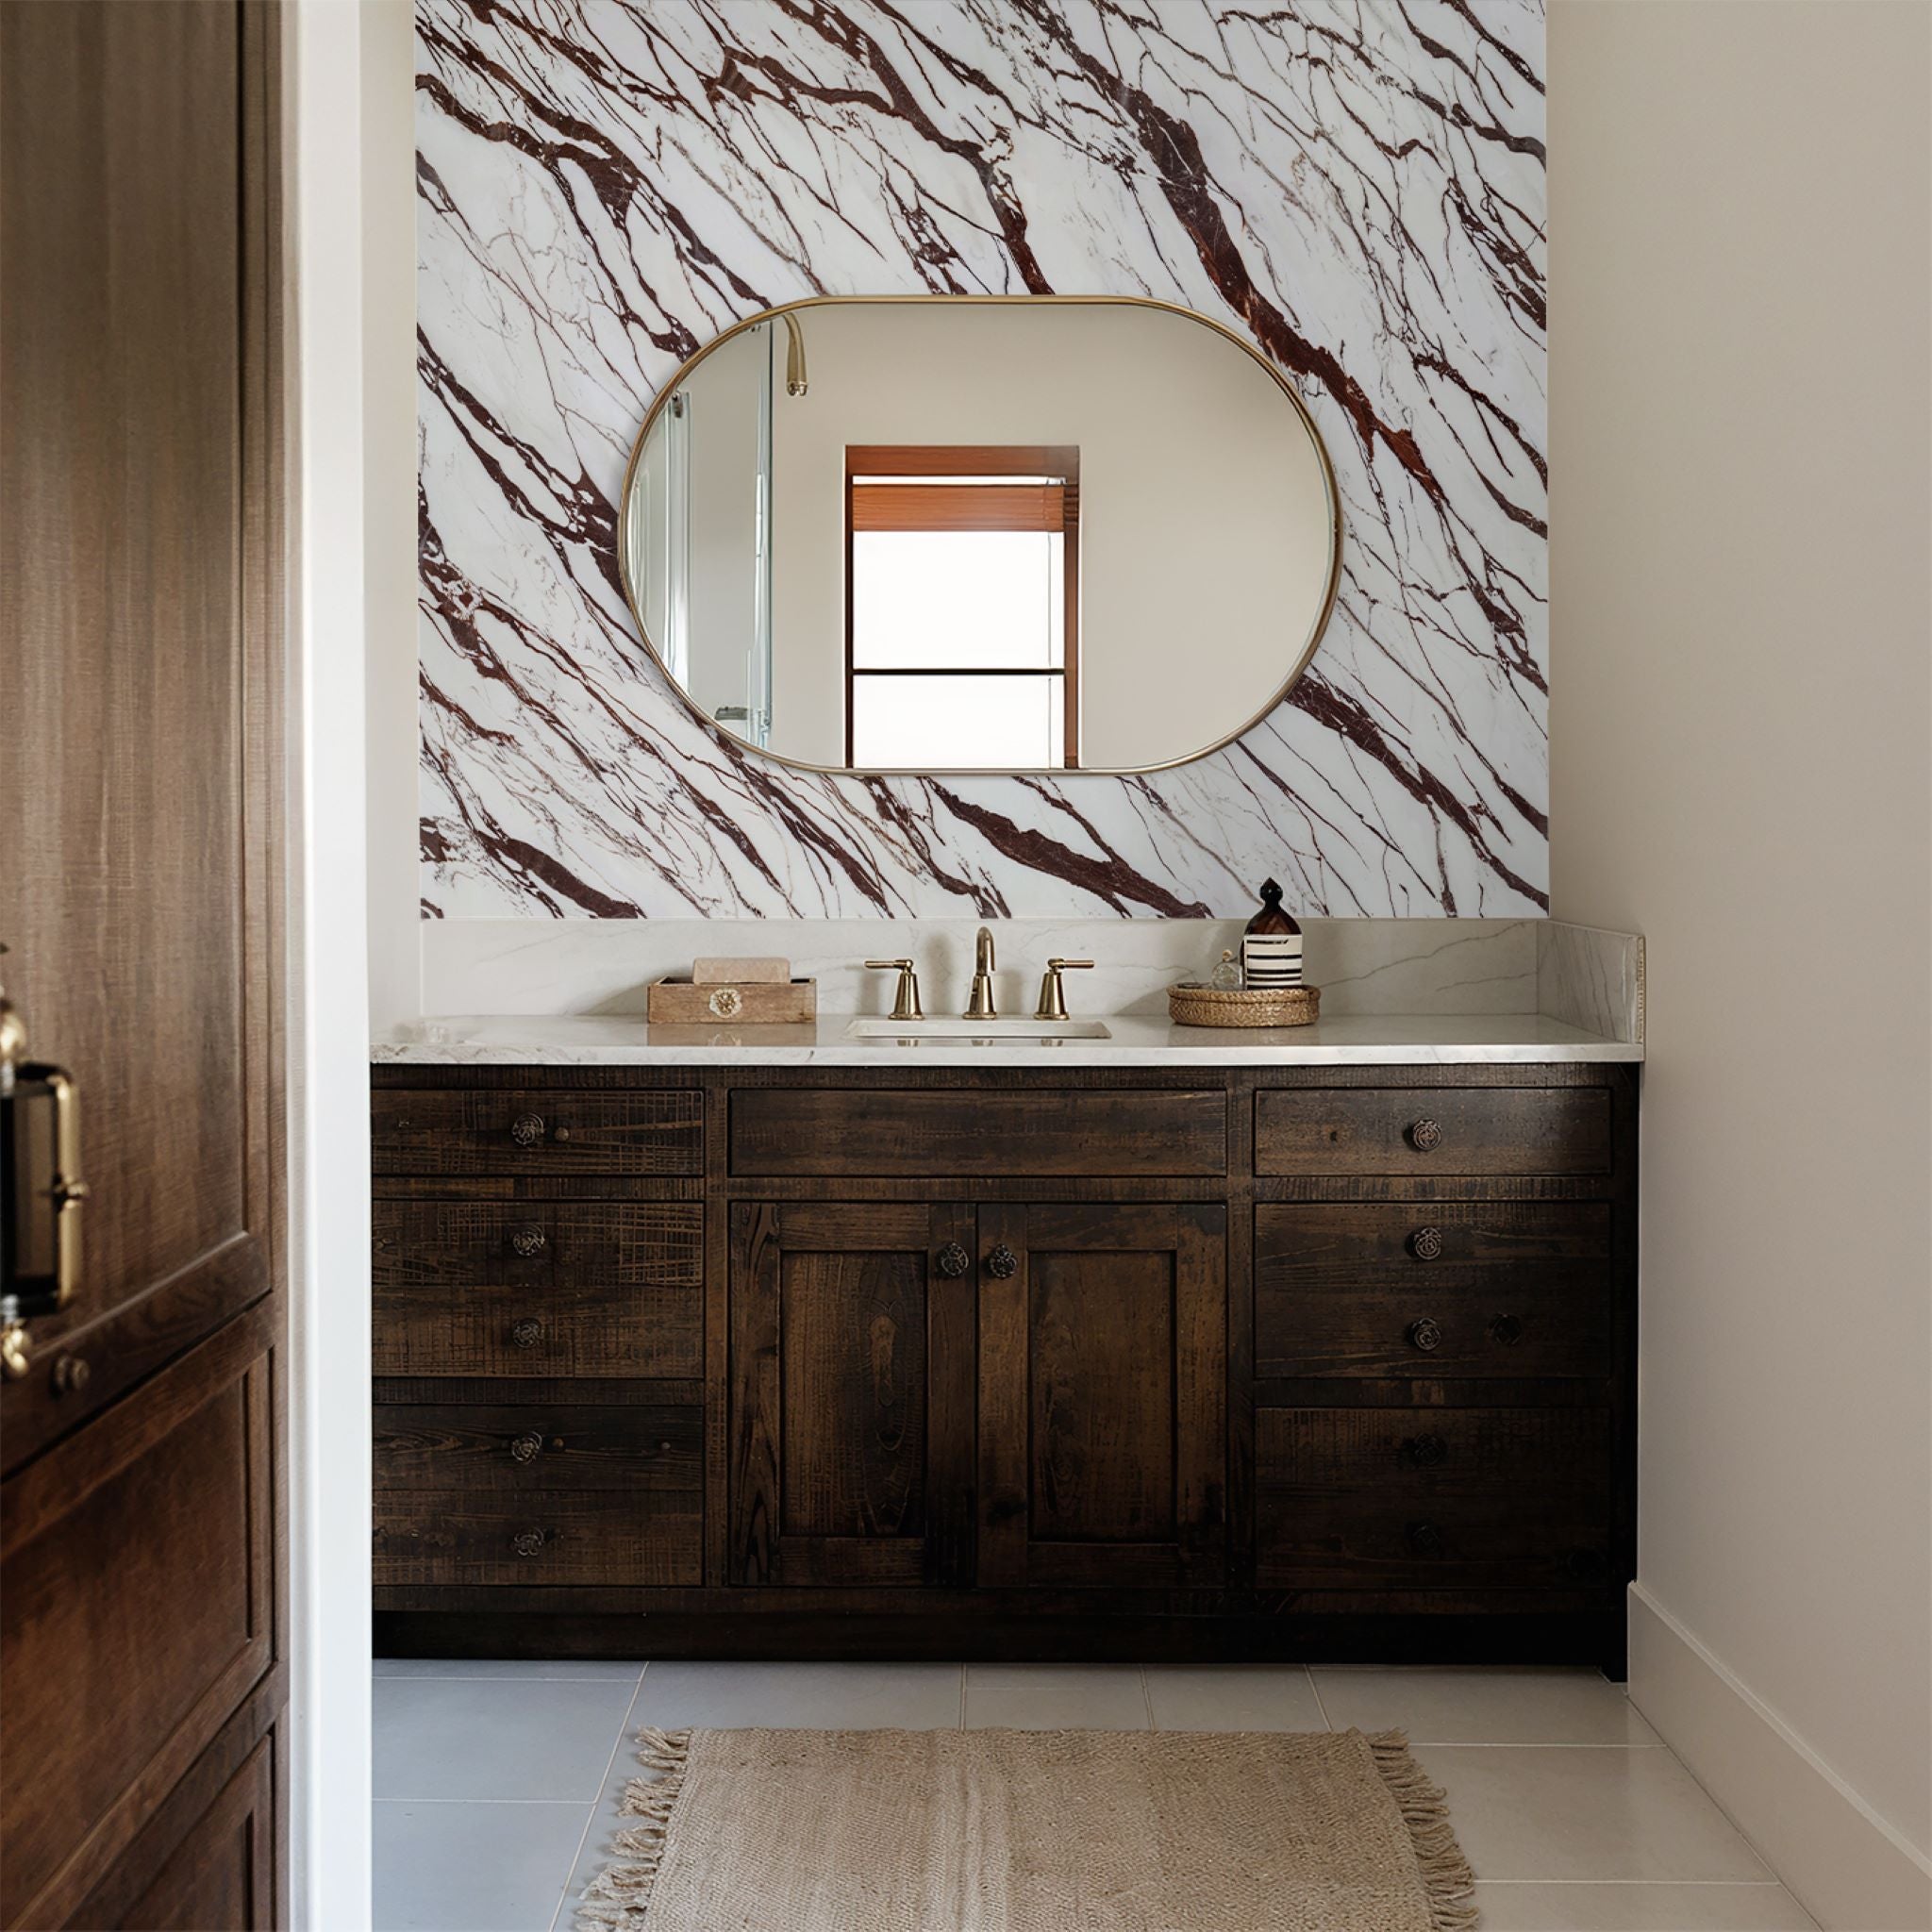 "Calacatta Wallpaper by Wall Blush featured in elegant bathroom, enhancing the decor with luxurious marble pattern."